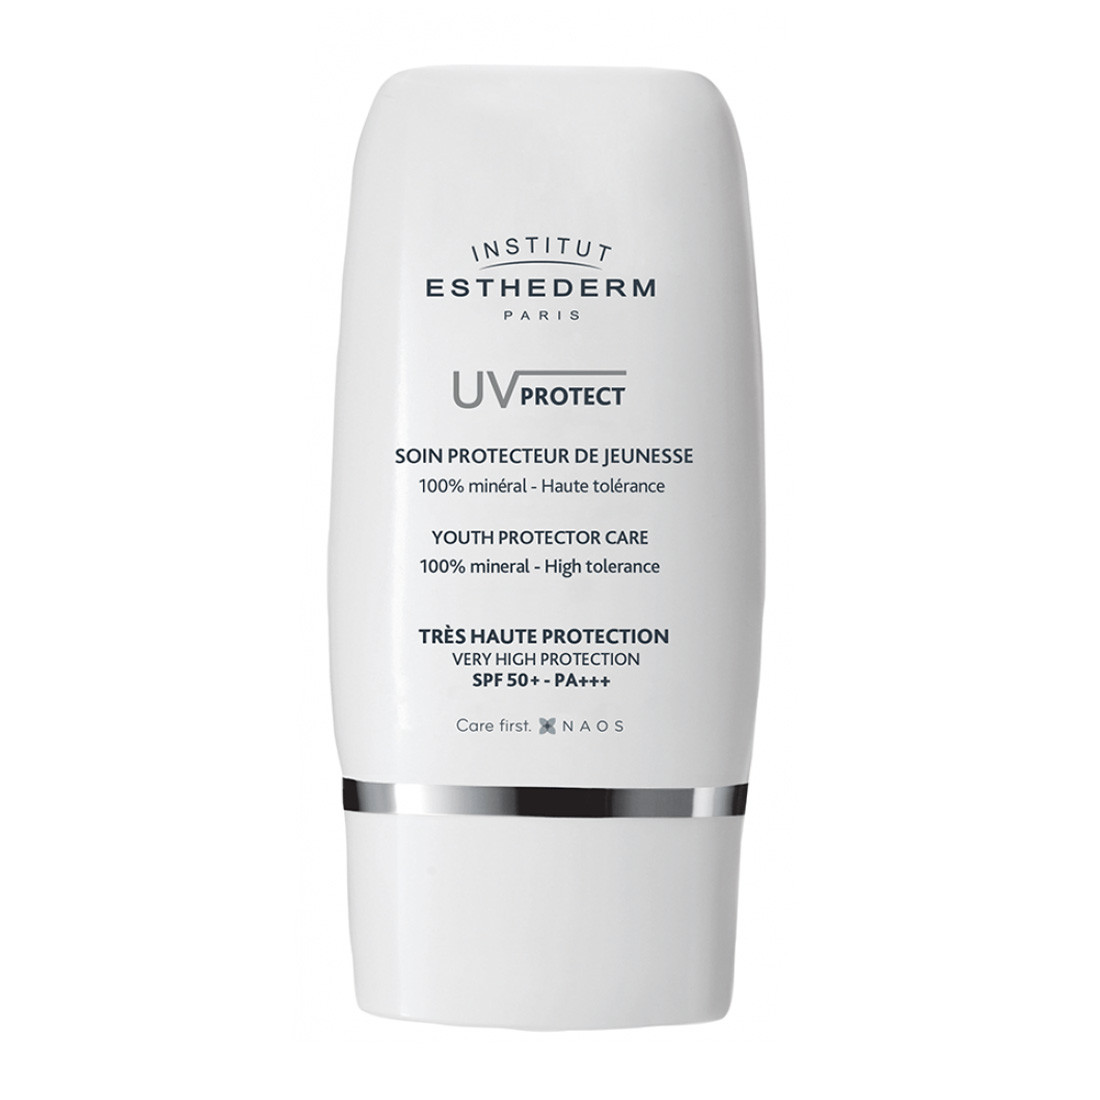 Institut Esthederm Youth Protector Care - Защитный флюид SPF 50 UV Protect